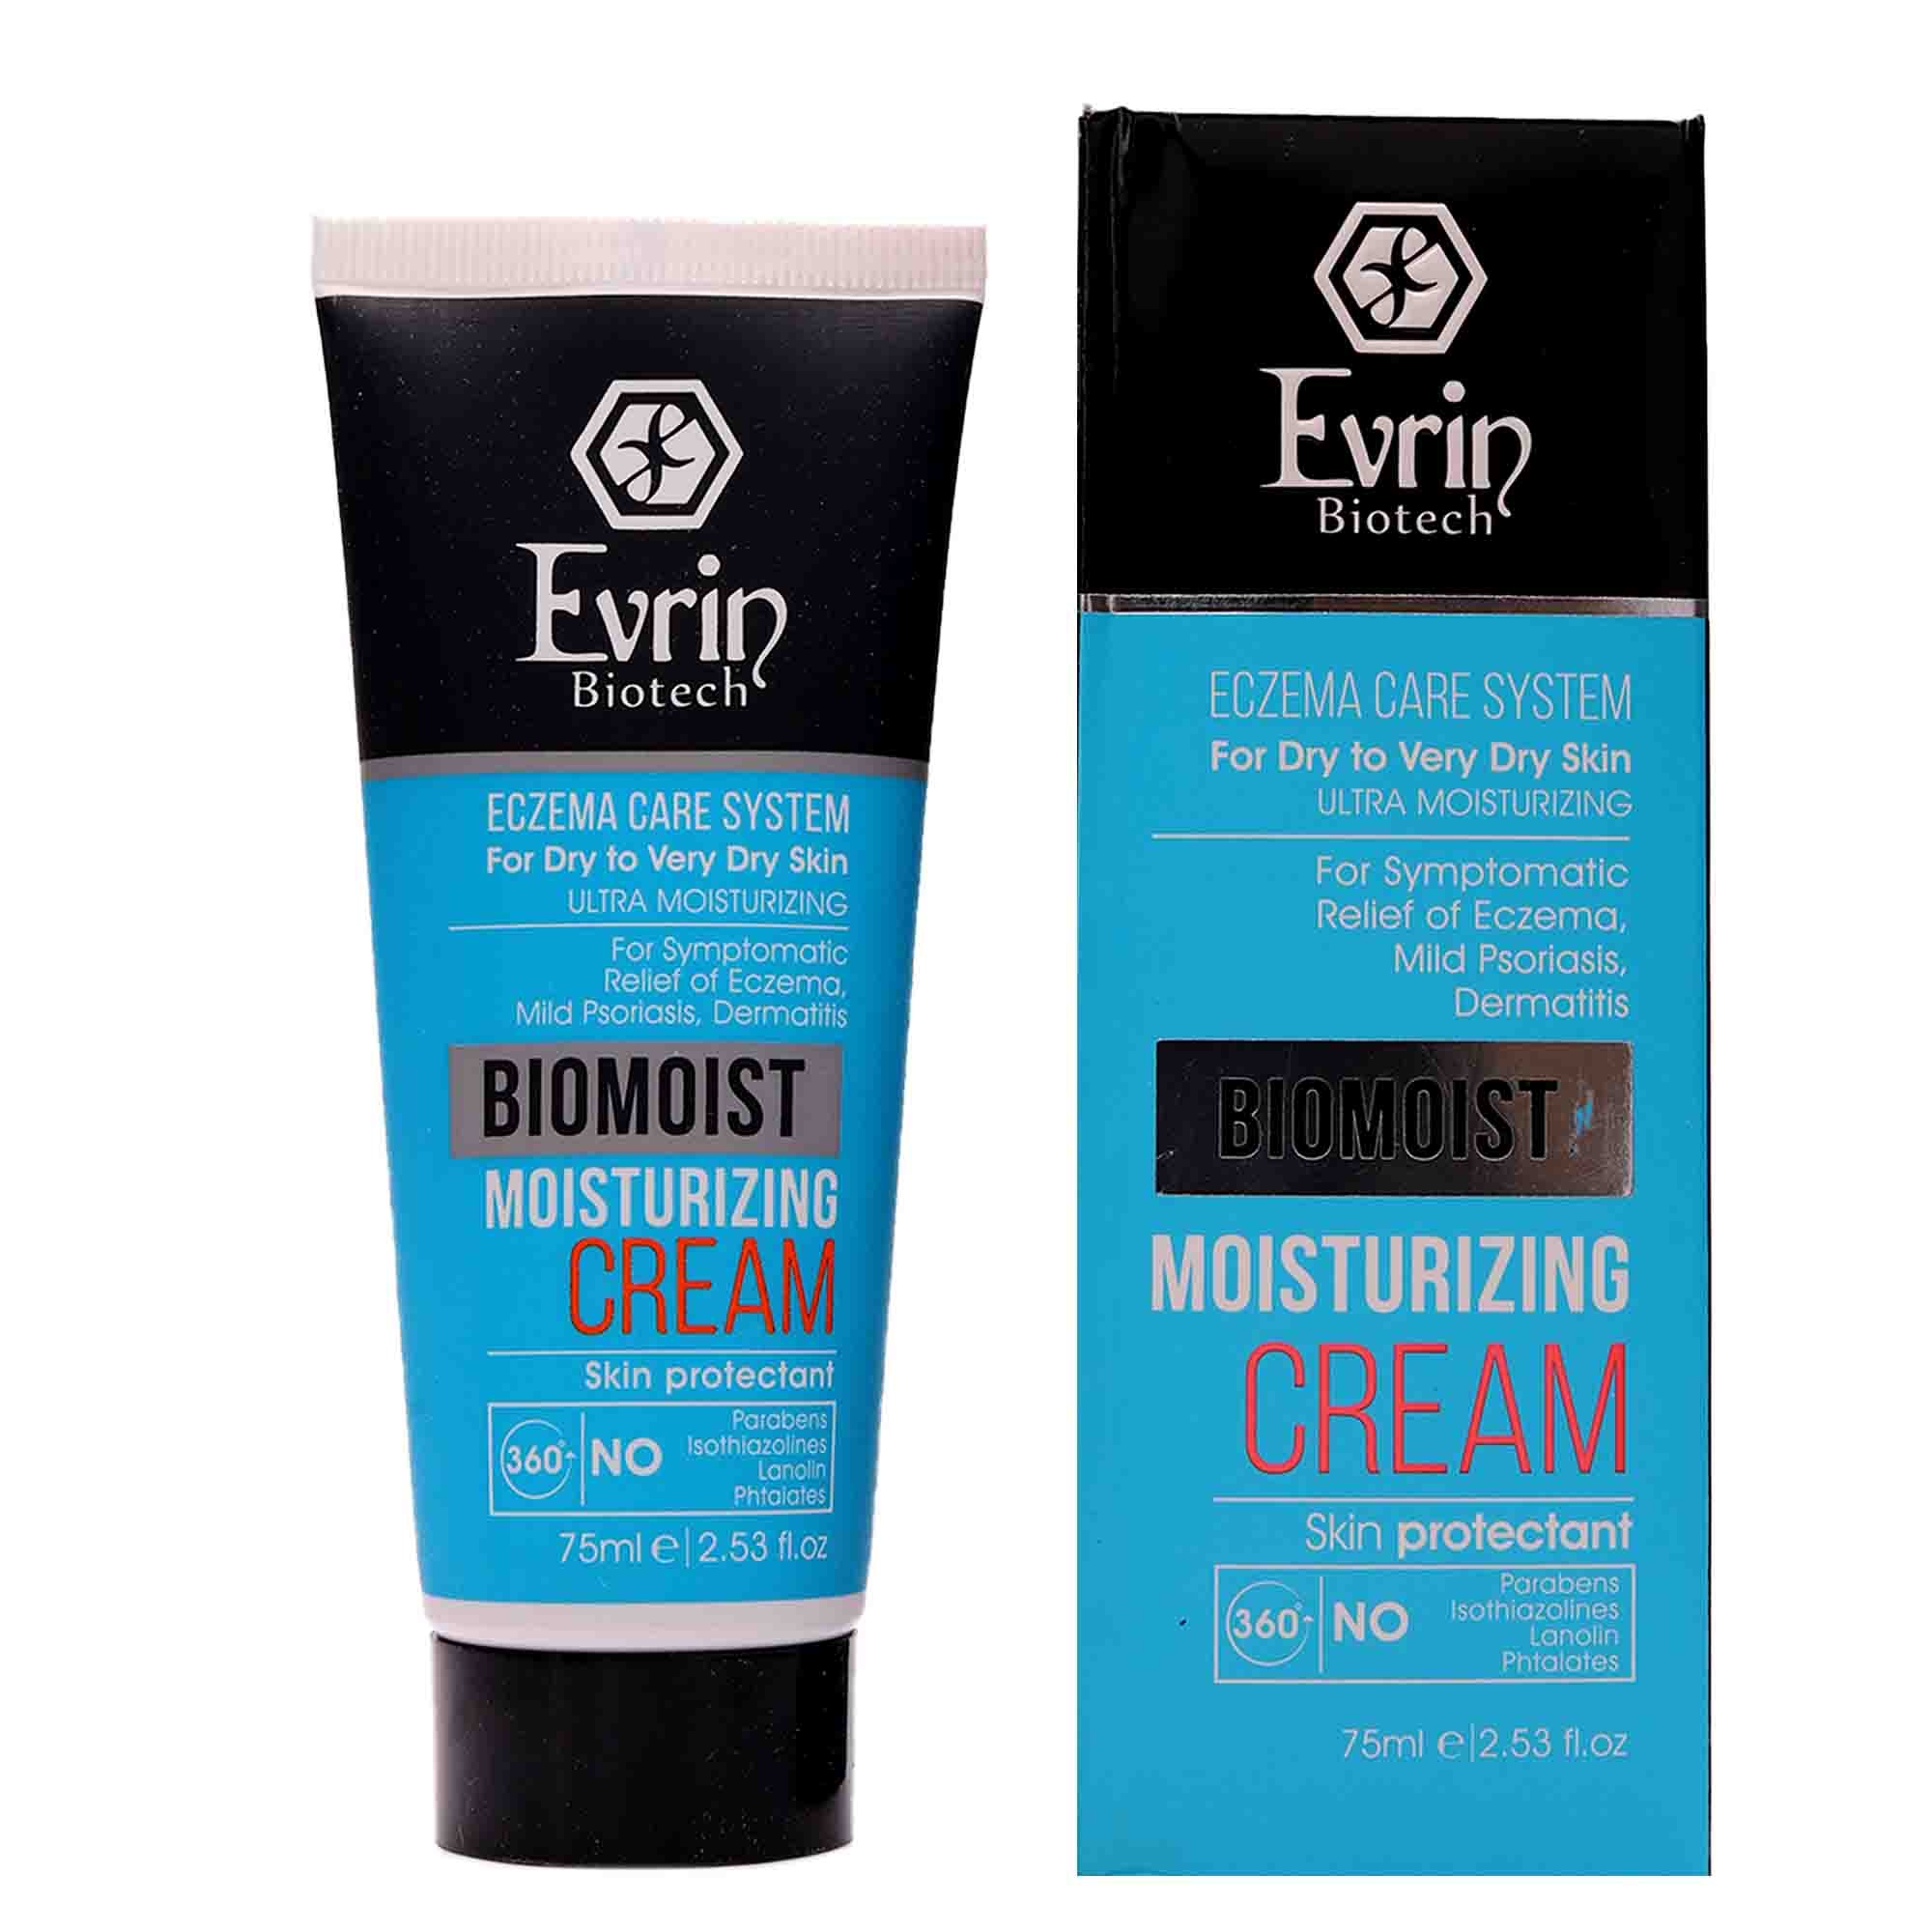 Moisturizing cream suitable for dry skin. Evrin